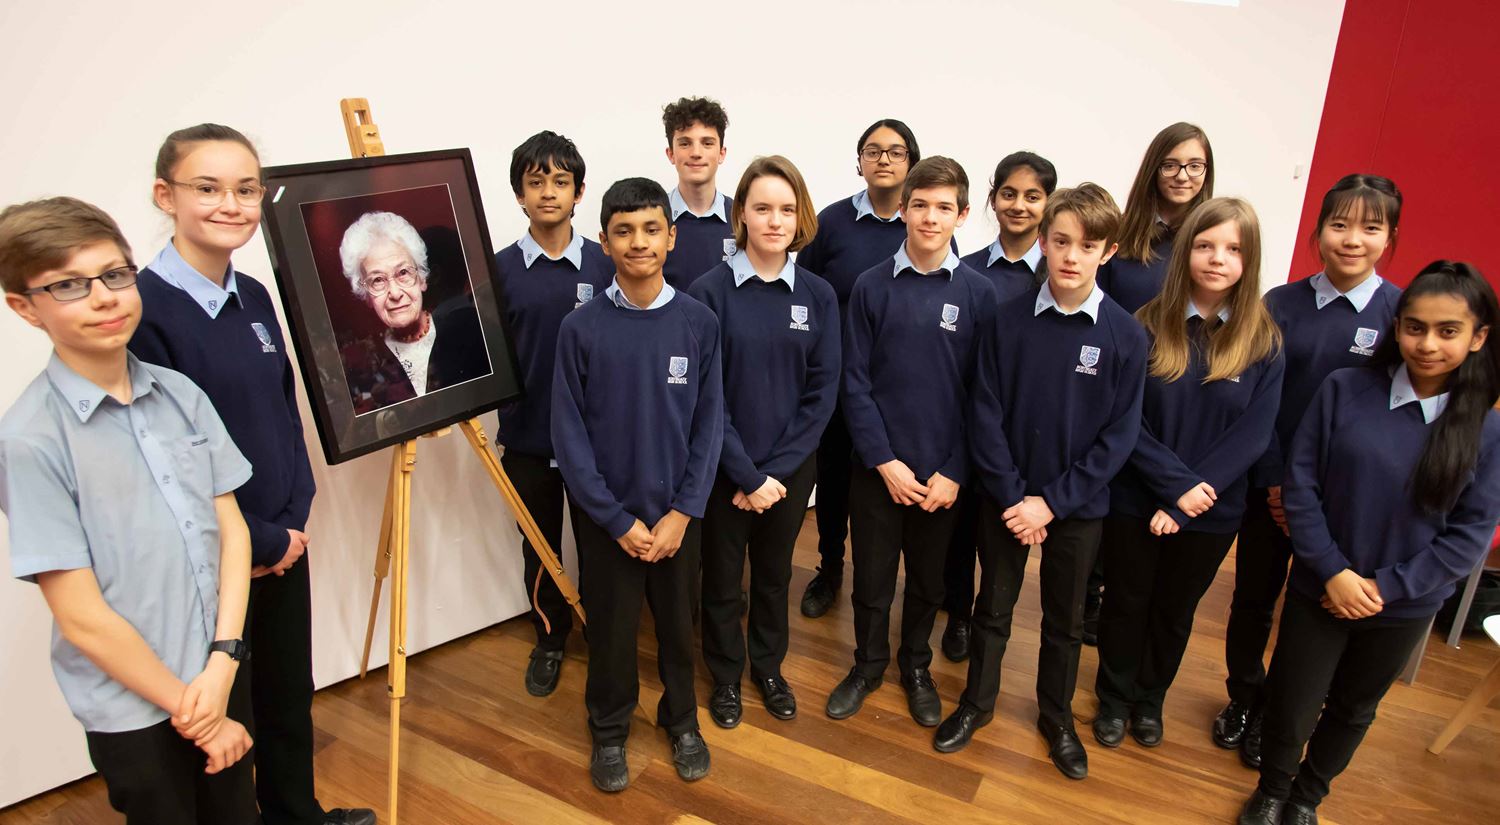 Dora Love Prize 2020 runners-up, Northgate High School with a portrait of Dora Love